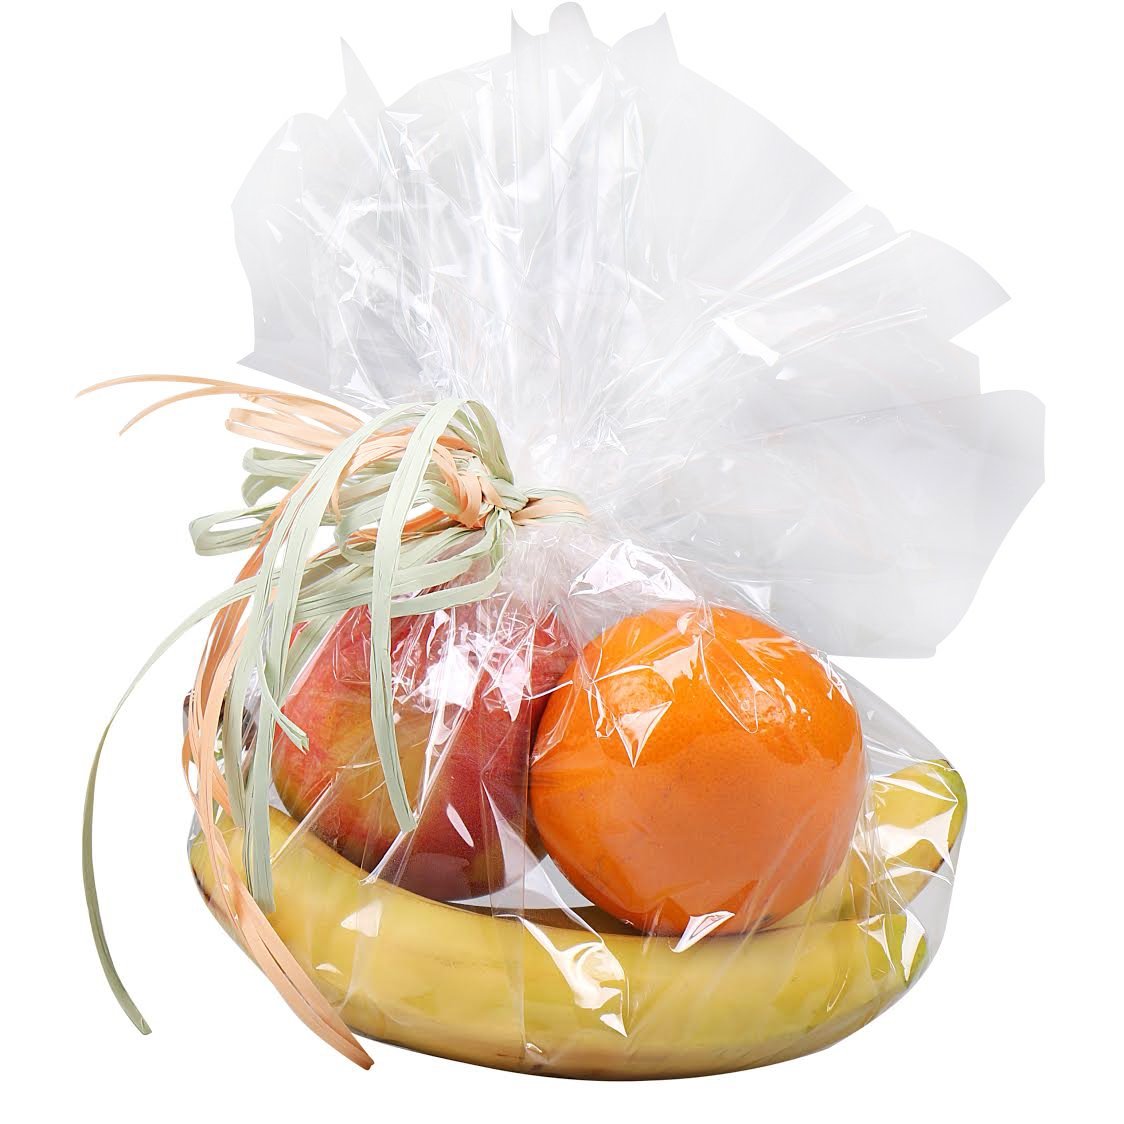 Product Fruit set as a gift